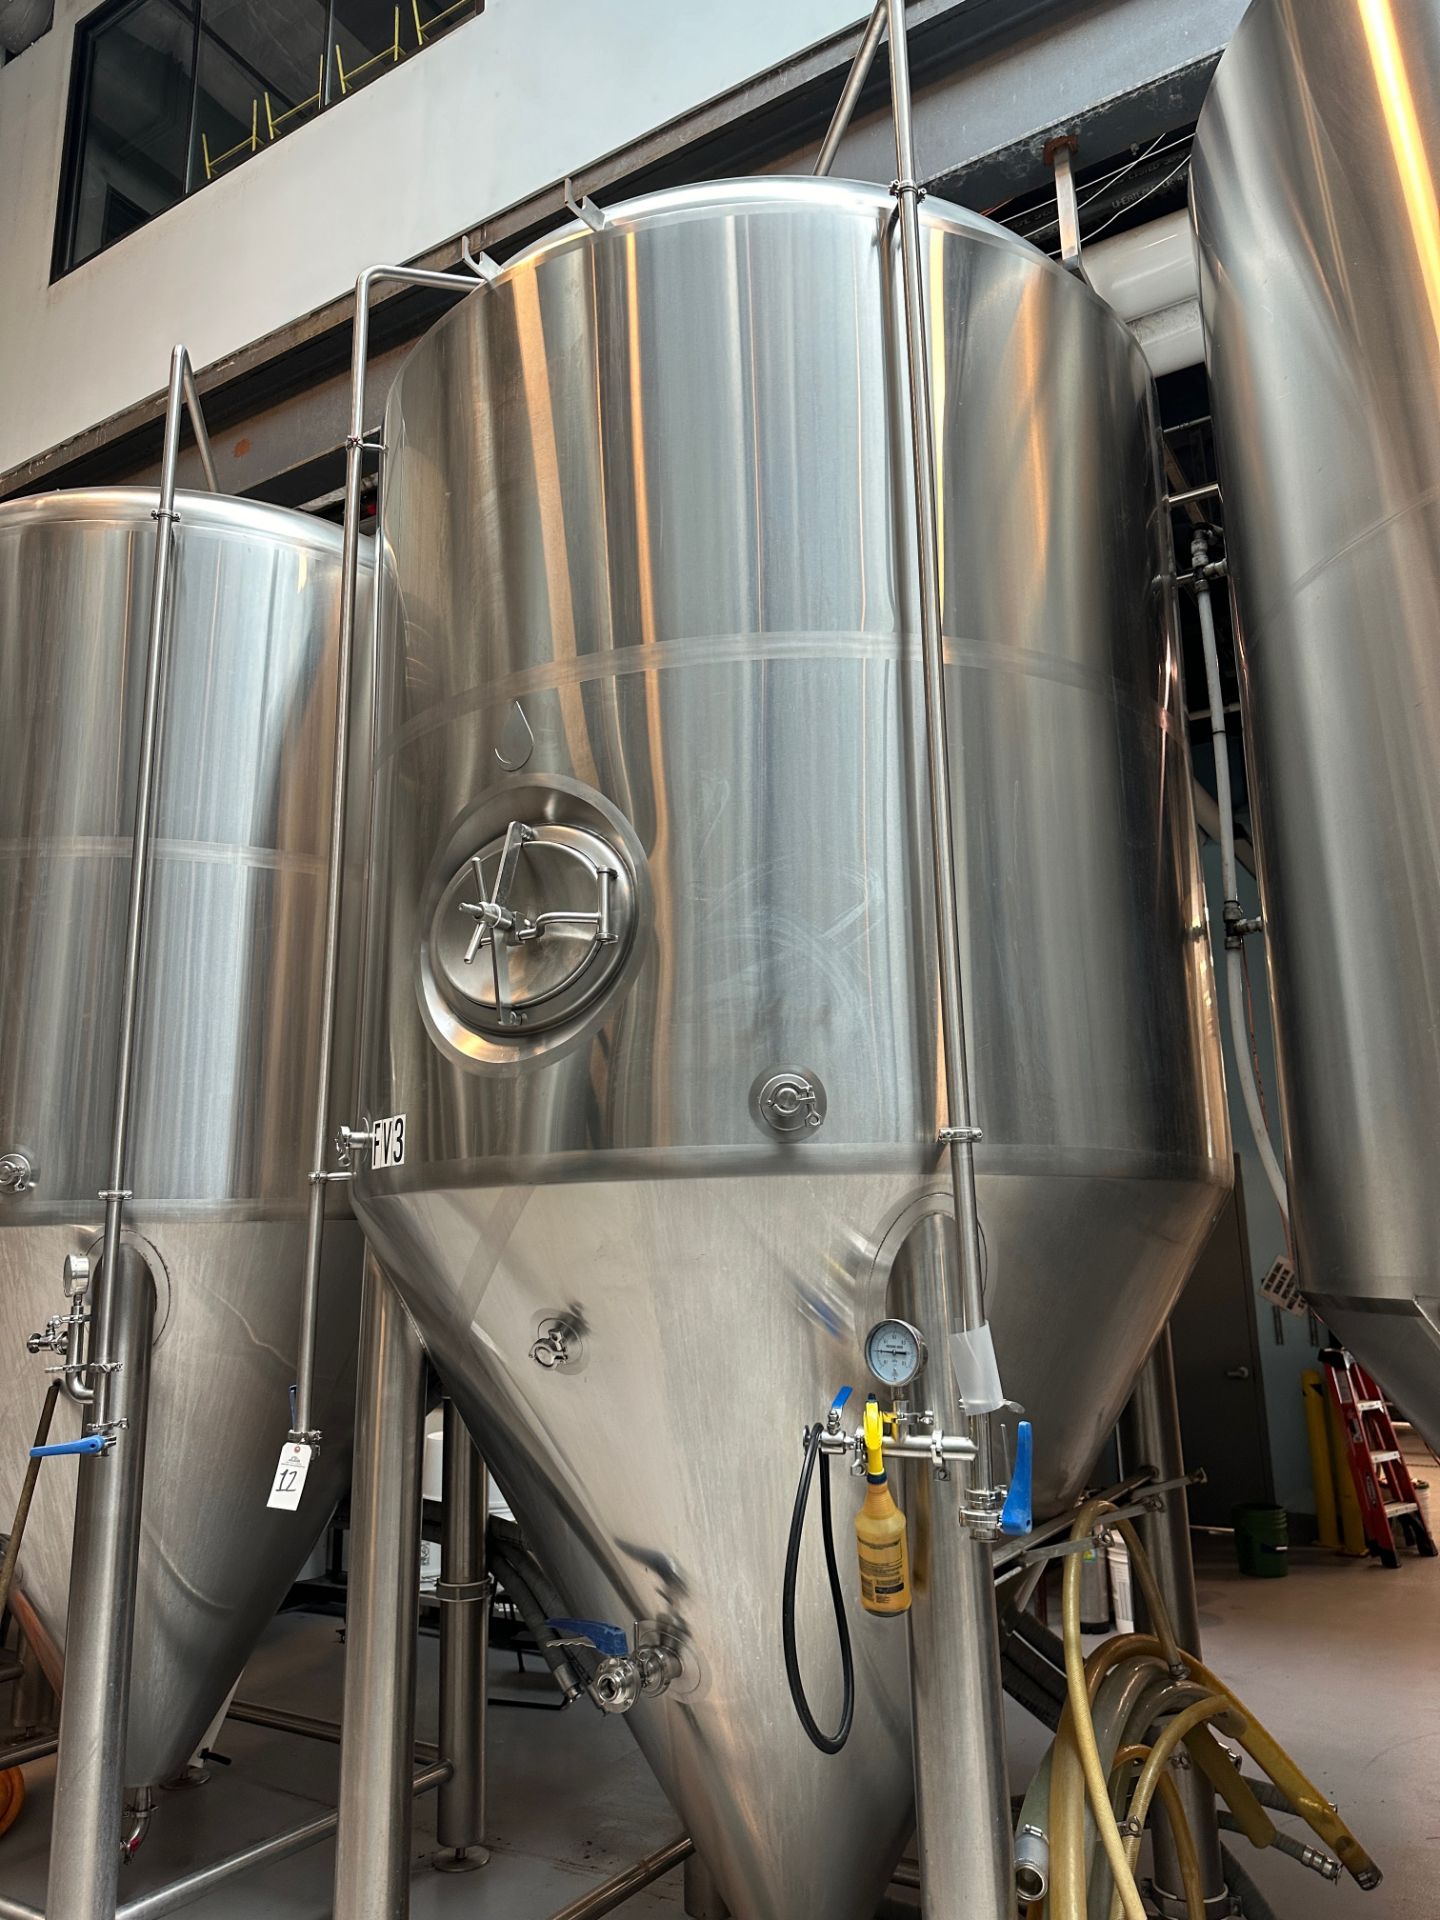 Complete 40 BBL Microbrewery - 40 BBL Deutsche 4-Vessel Brewhouse, Tanks, Can Line - See Description - Image 36 of 335